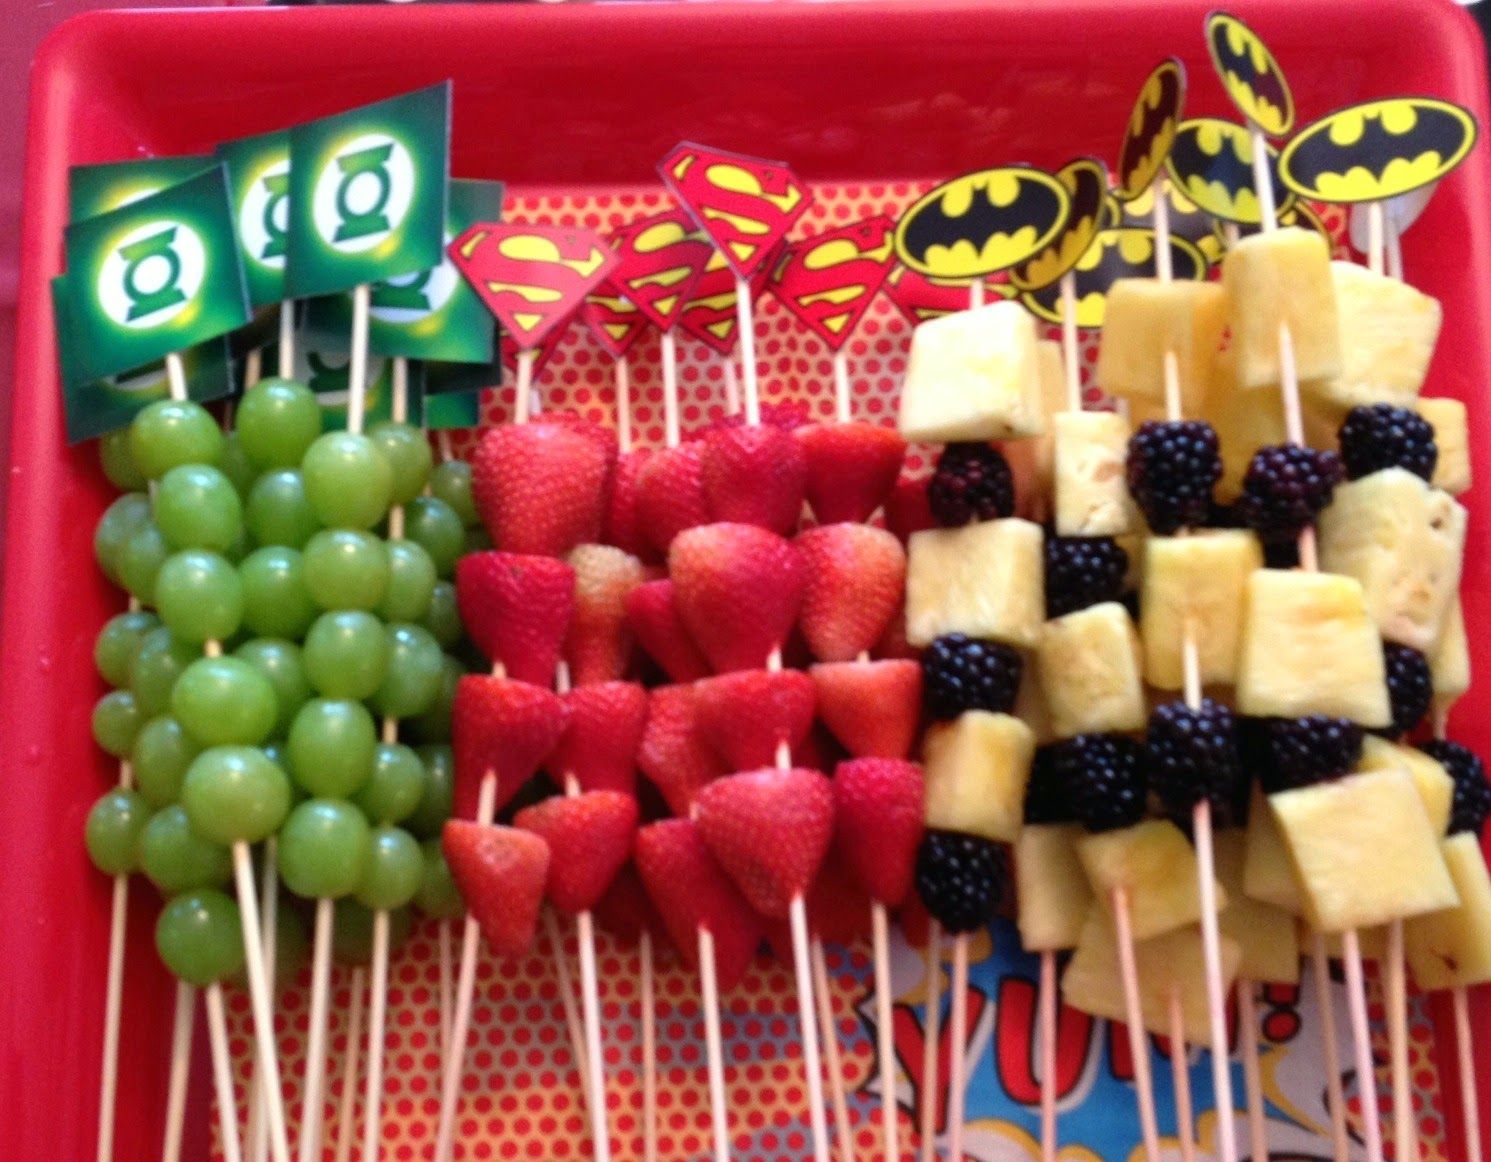 fruit kabobs–I ran out of time to put the fruit on the sticks, but having them in rows looked just as nice